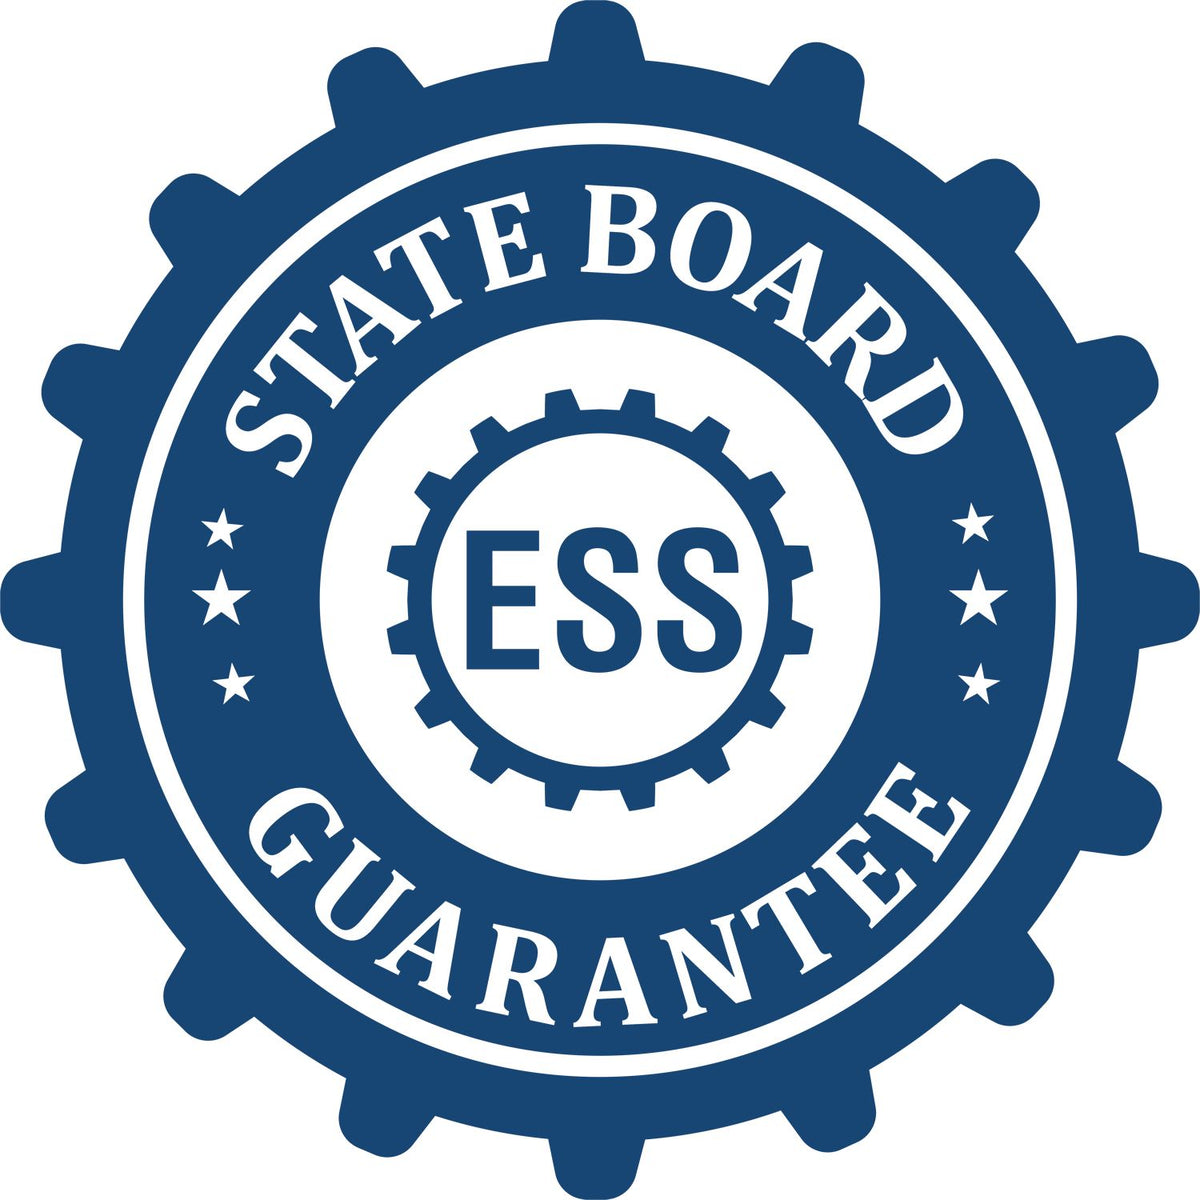 An emblem in a gear shape illustrating a state board guarantee for the Hybrid Utah Geologist Seal